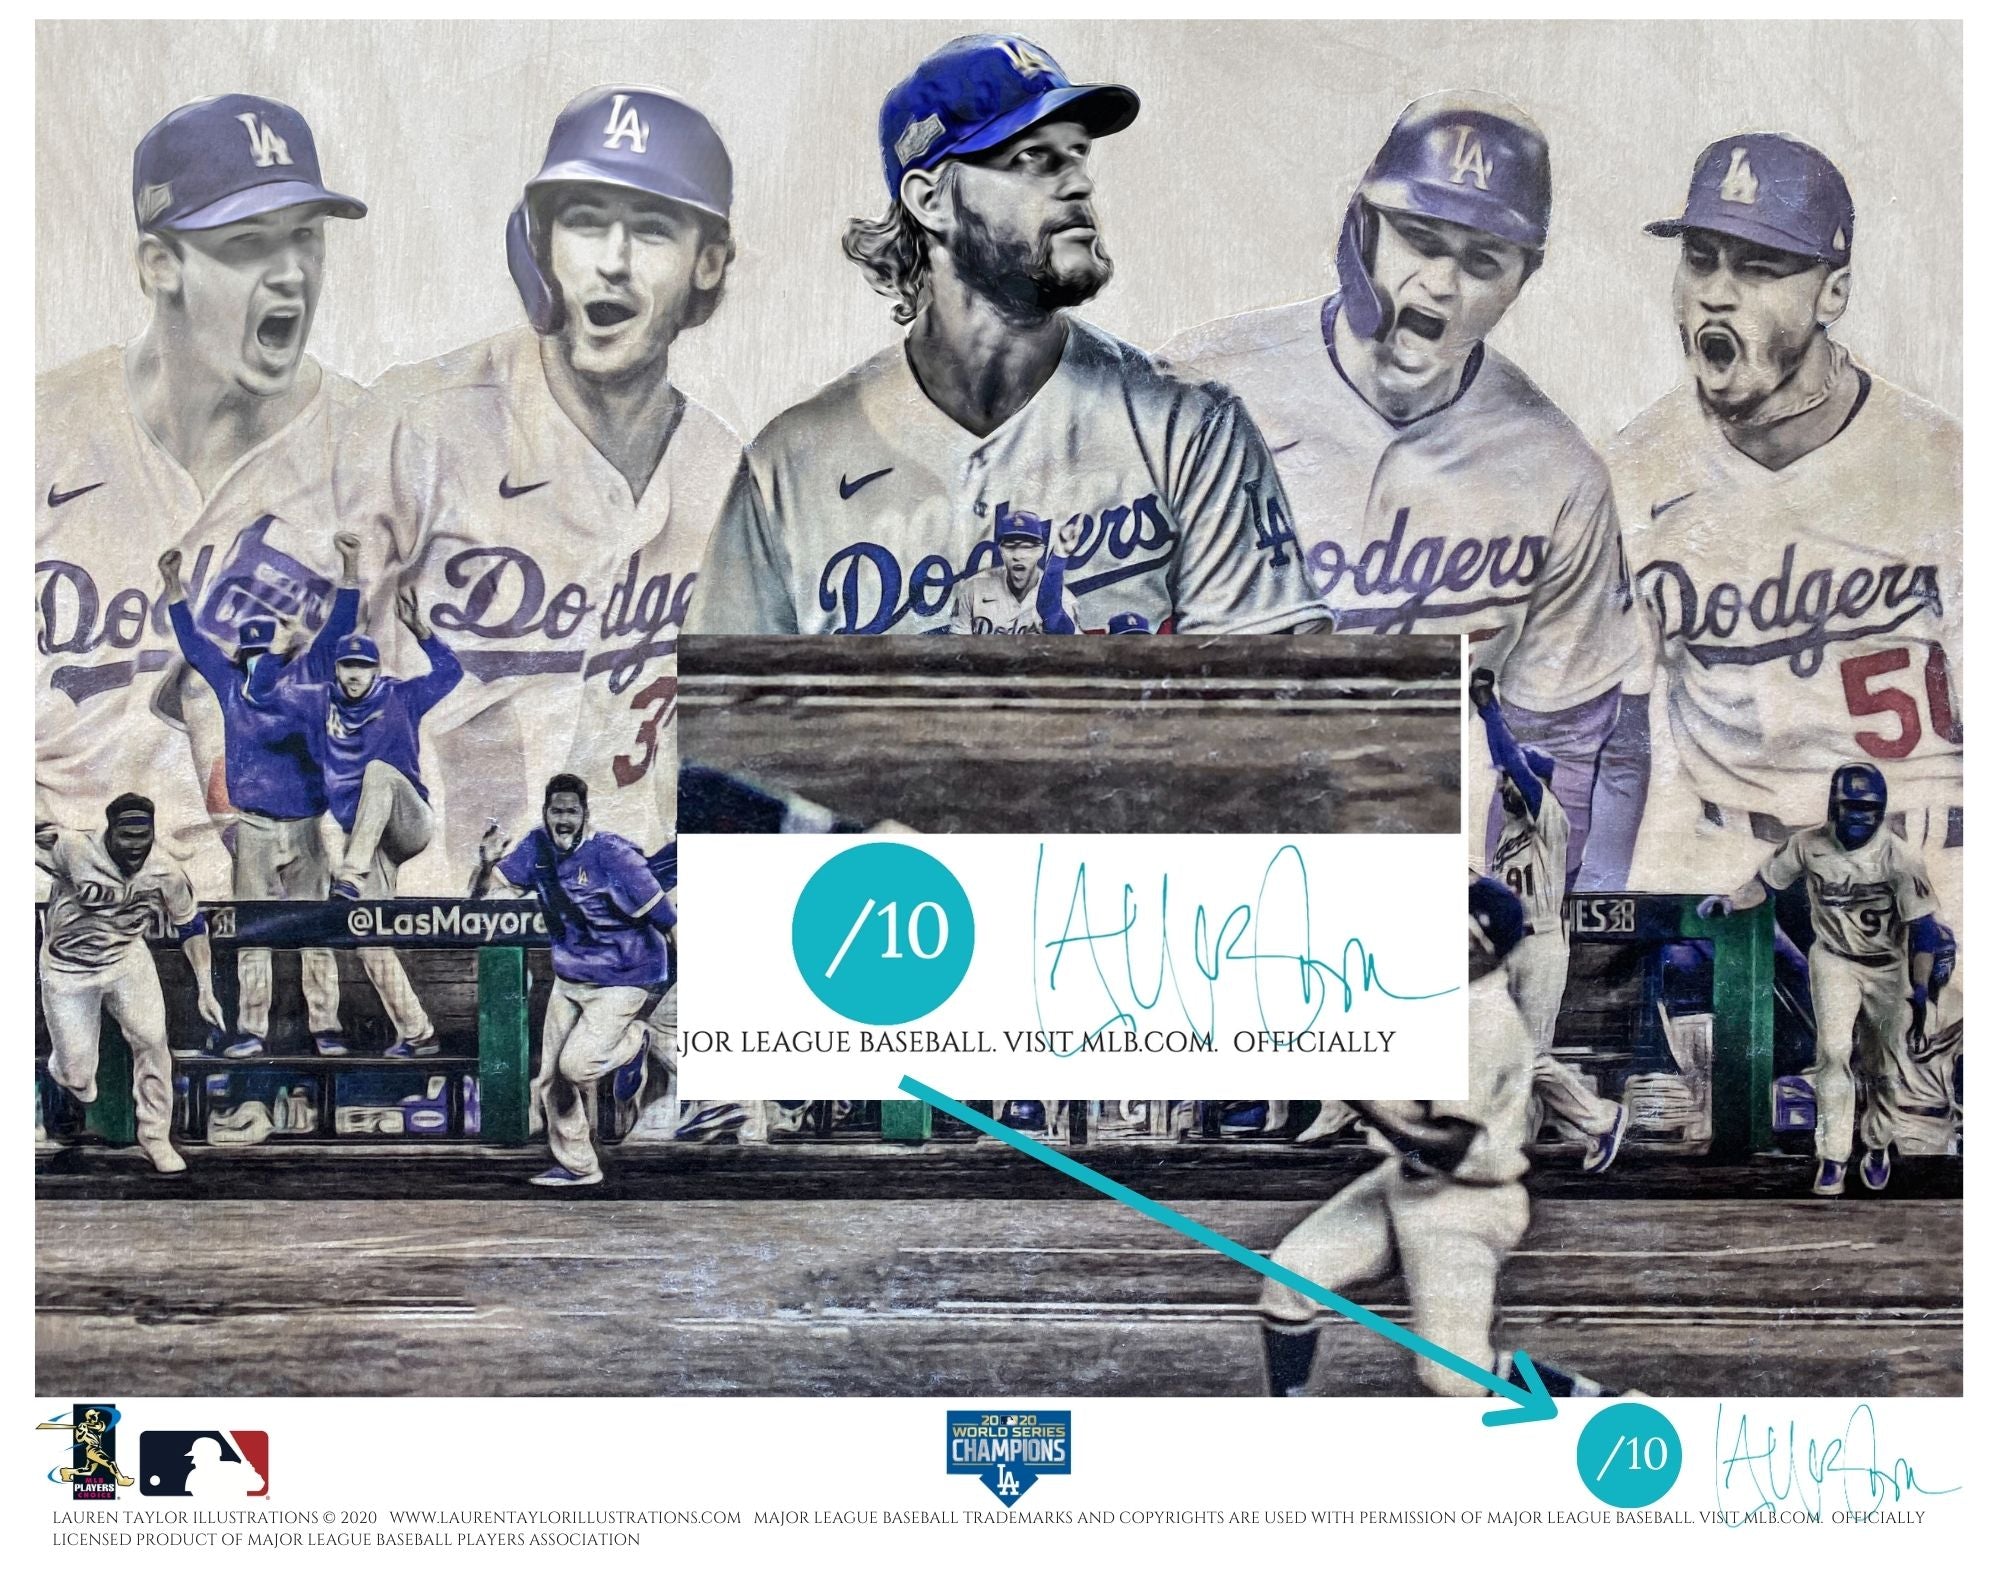 "Seven" (Los Angeles Dodgers) 2020 World Series Champions - Officially Licensed MLB Print - Commemorative TEAL SIGNATURE Limited Release /10